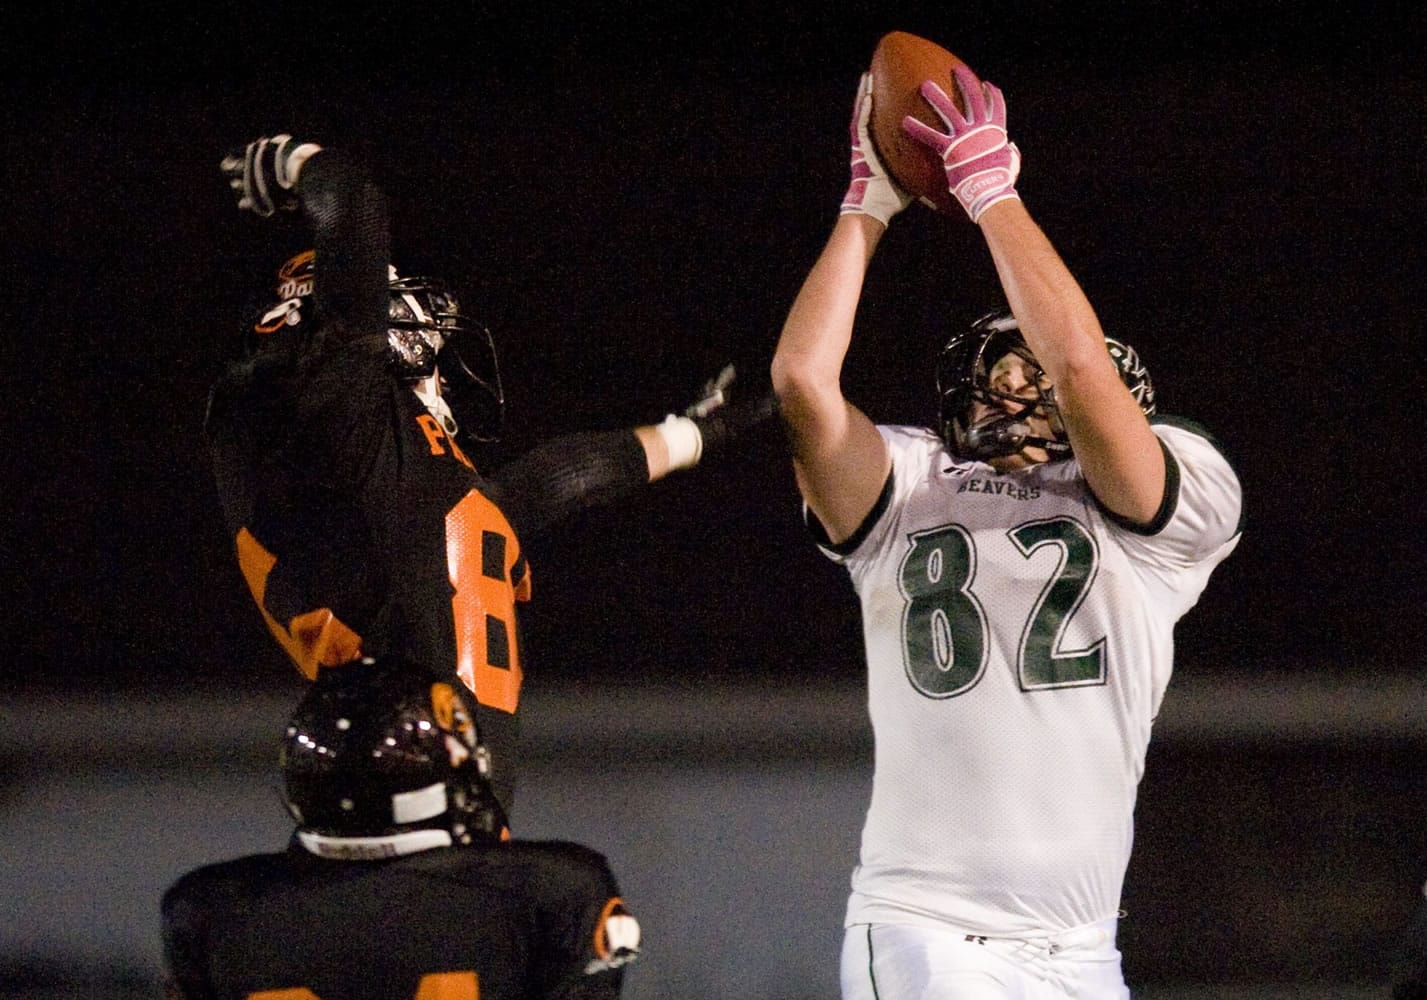 Woodland's Nick Fuller, #82, hauls in the game winning touchdown pass in overtime to beat Washougal 35-28 at Fishback Stadium in Washougal, Firday, October 14, 2011.